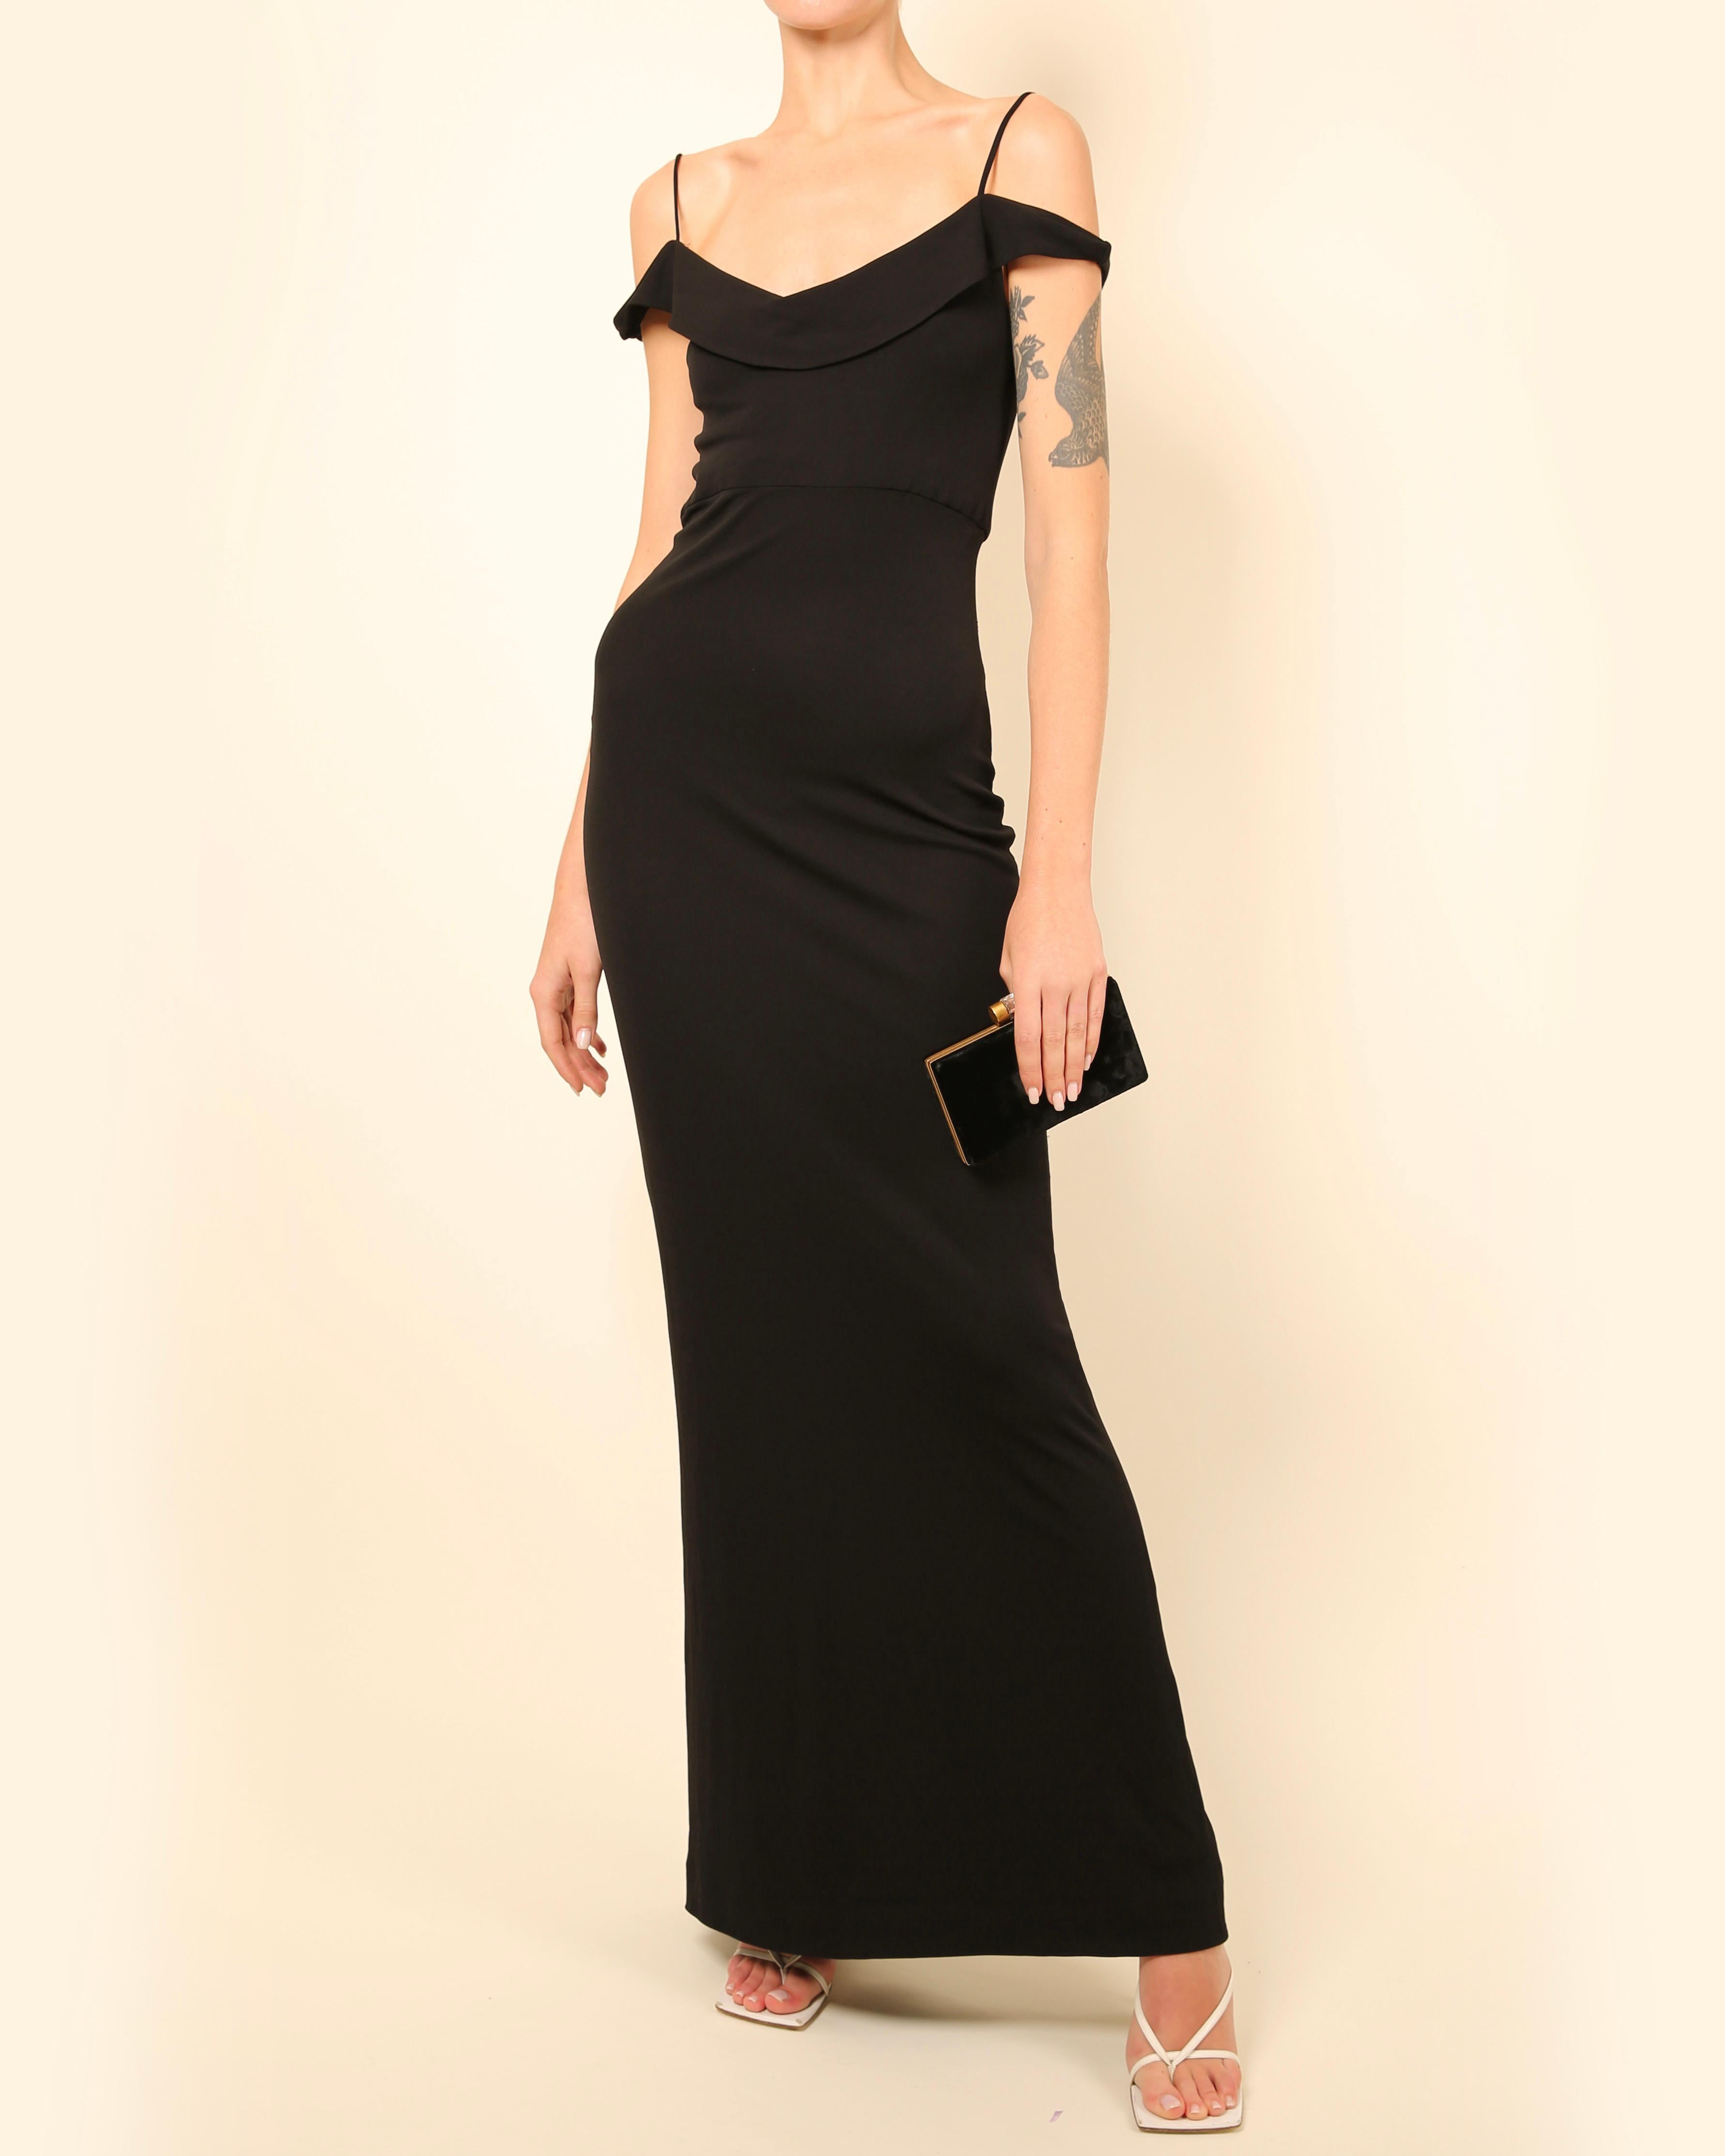 Black Vera Wang black off the shoulder fitted floor length maxi dress gown For Sale